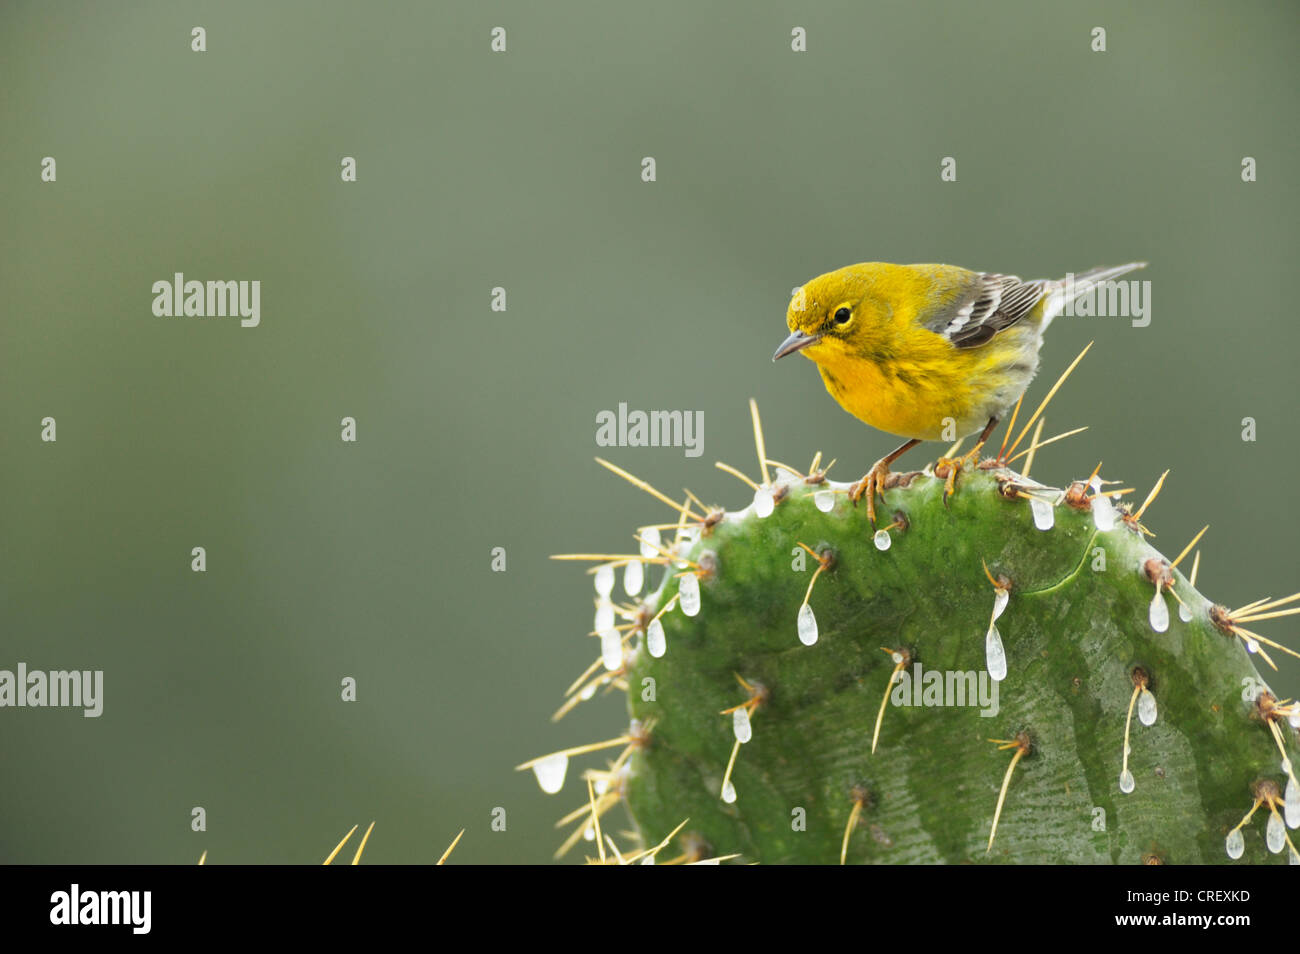 Pine Warbler (Dendroica pinus), male perched on ice covered Texas Prickly Pear Cactus (Opuntia lindheimeri), Dinero, Texas Stock Photo